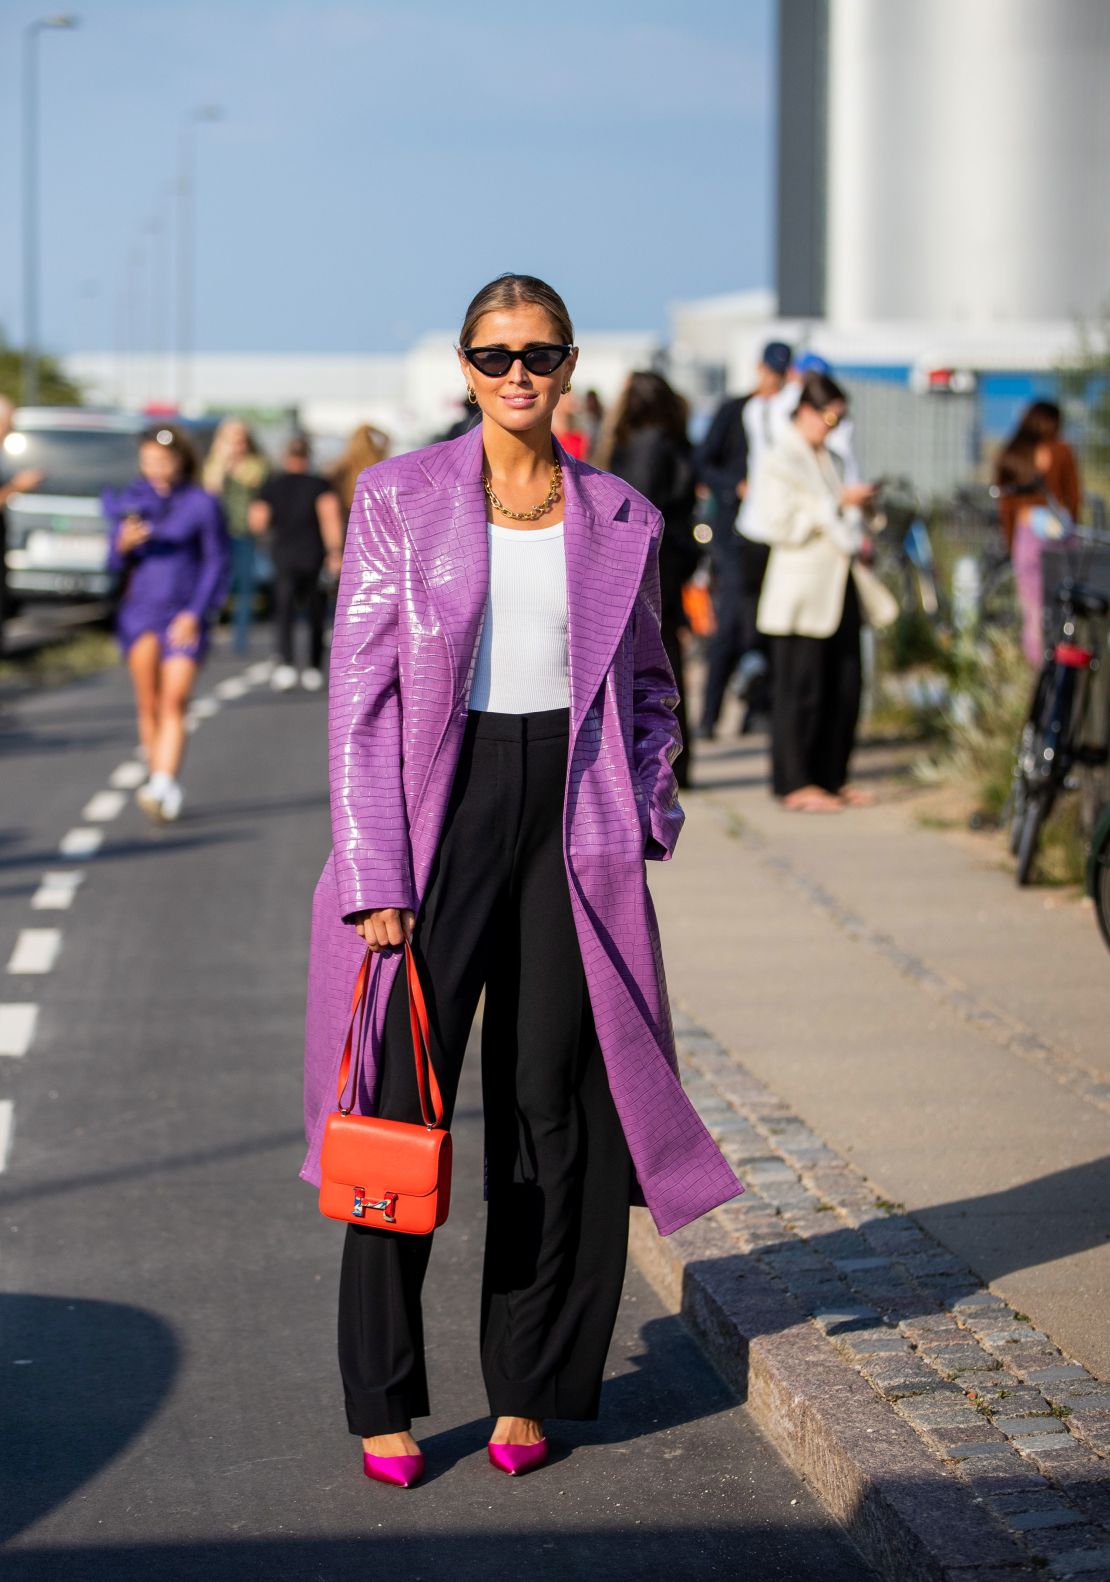 Don't despair, here are five outfits you can wear instead of the